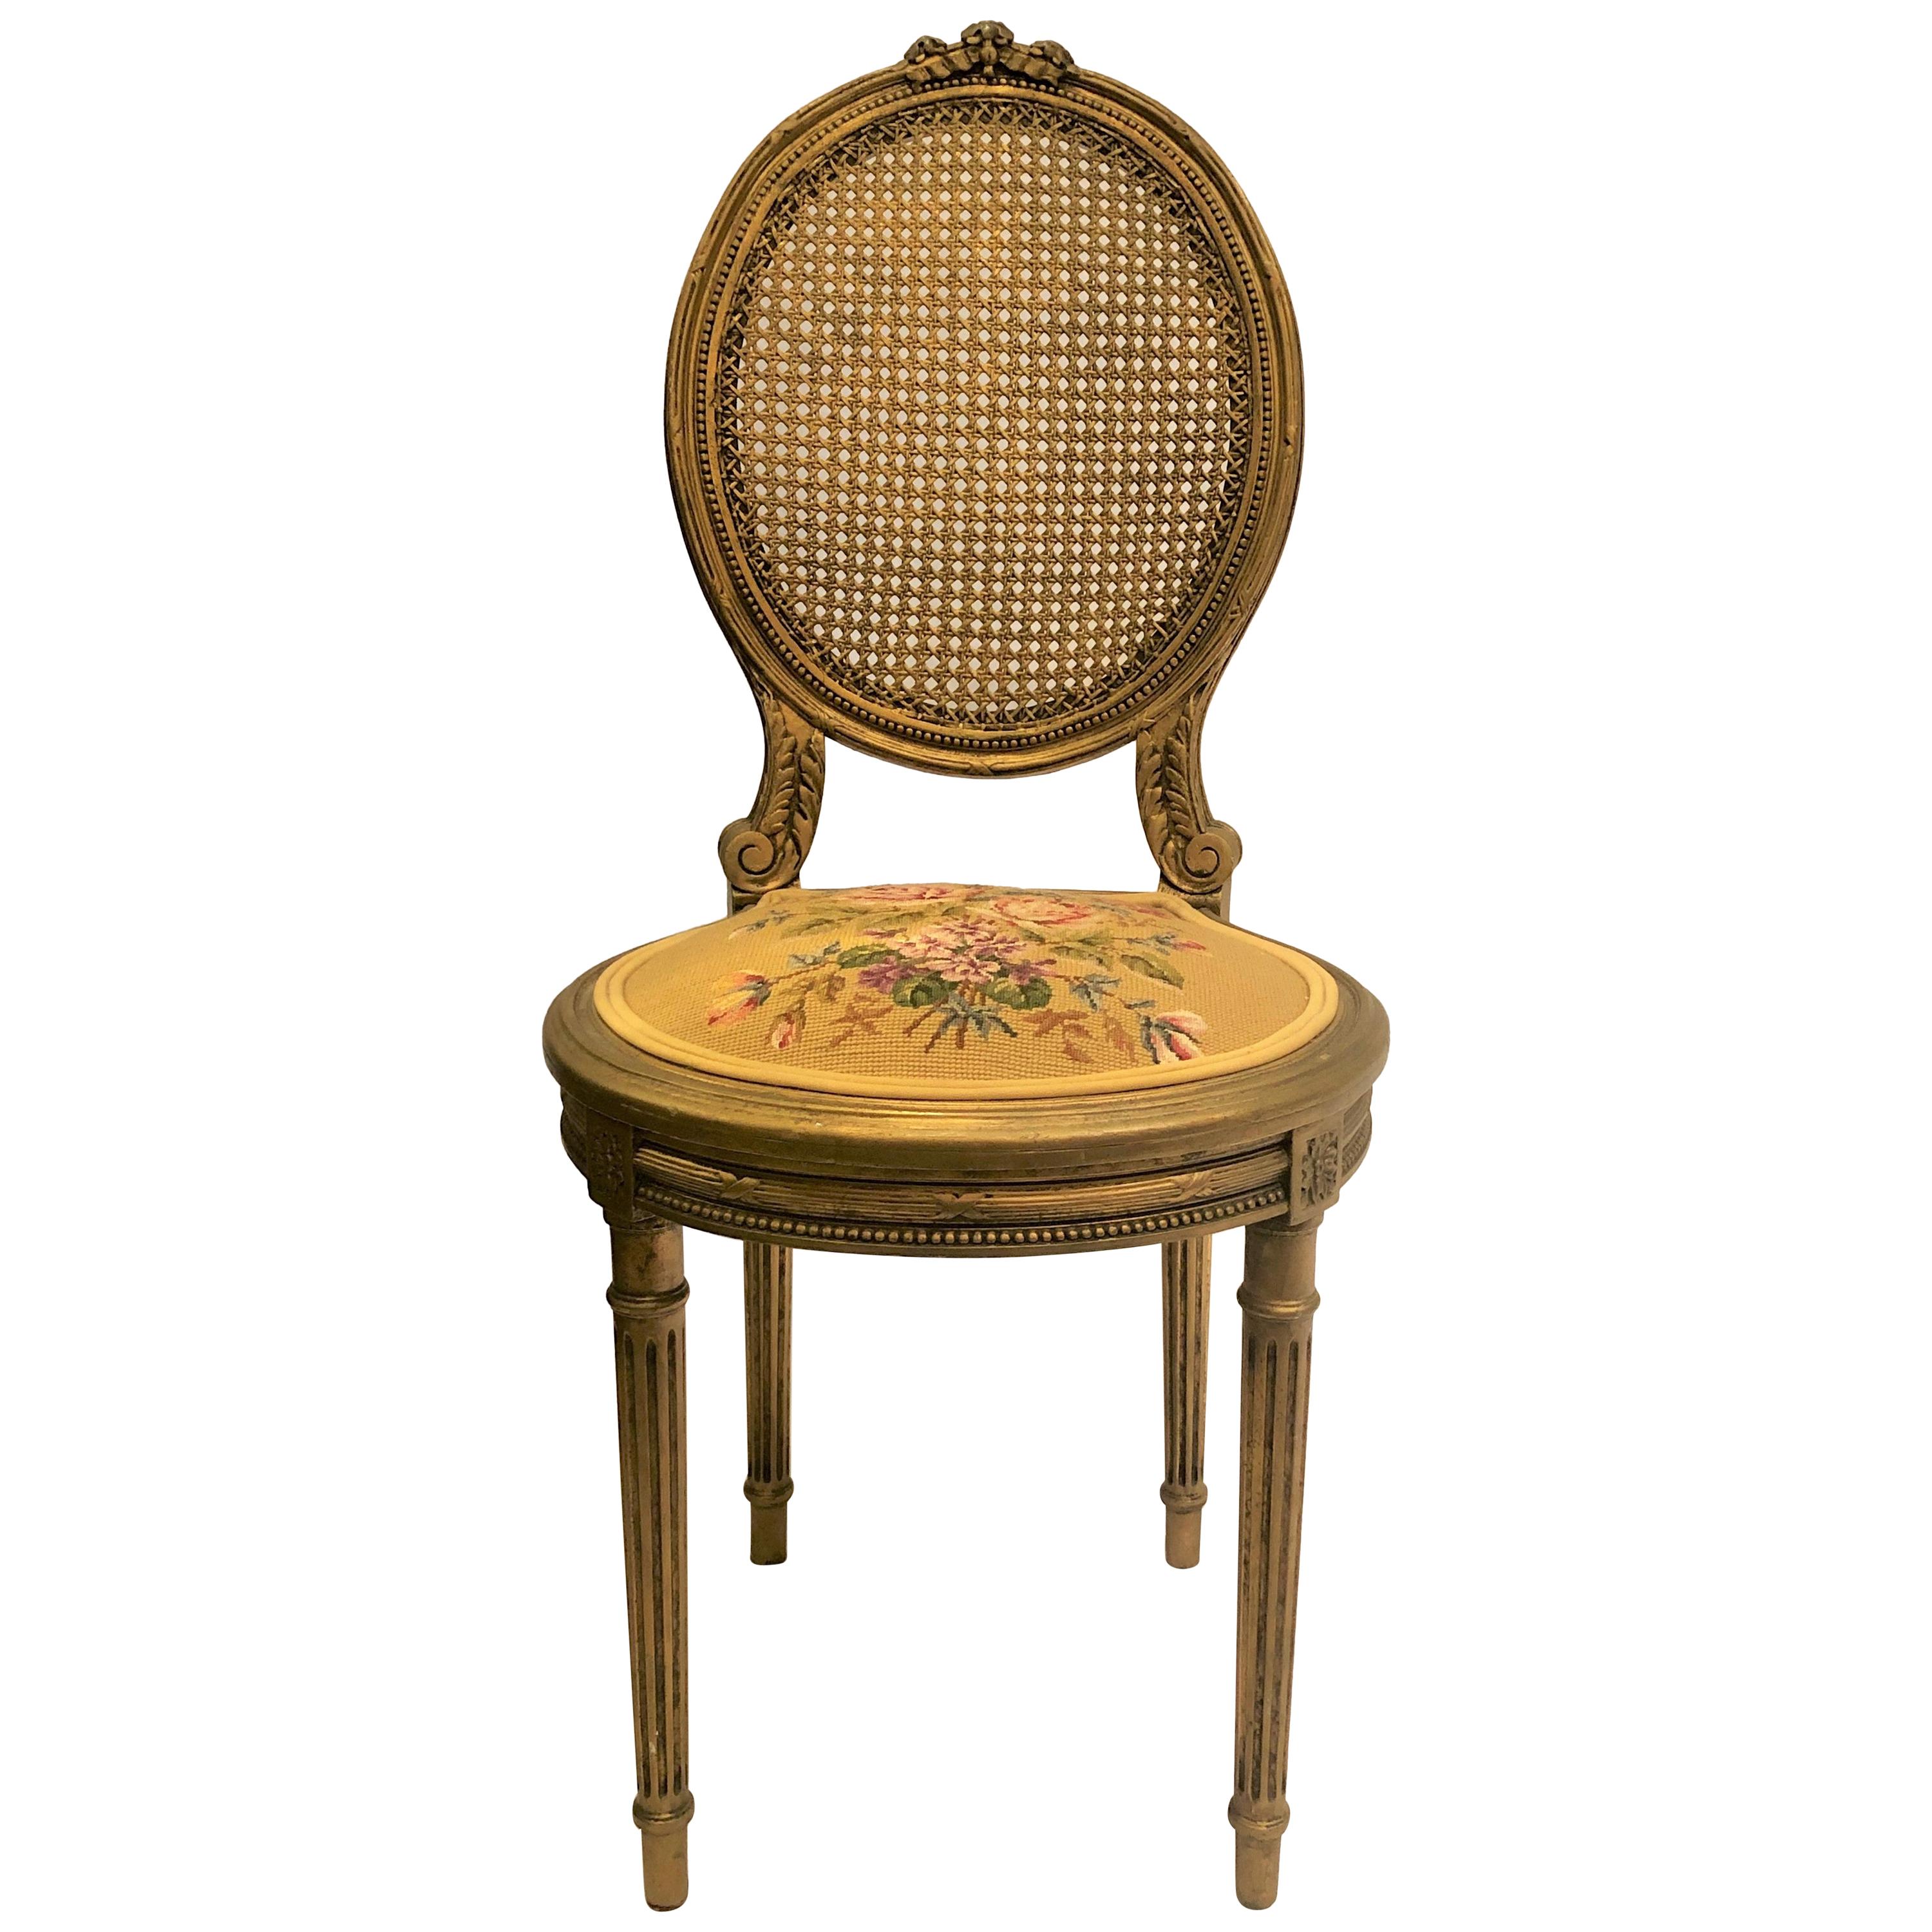 Antique French Carved Wood Gilt Side Chair, circa 1870-1880